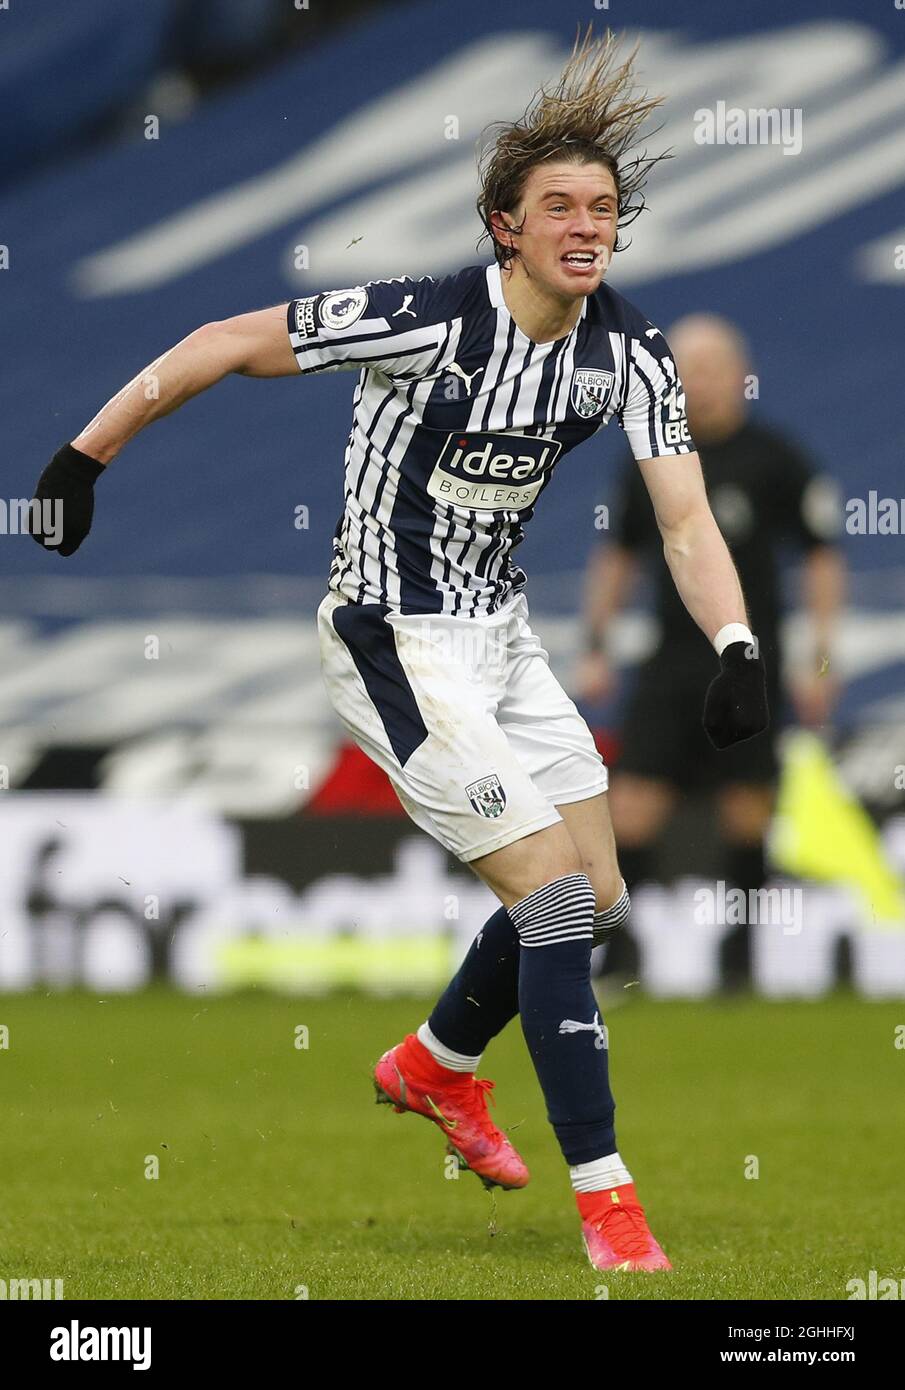 Conor Gallagher of West Bromwich Albion during the Premier League match at The Hawthorns, West Bromwich. Picture date: 14th February 2021. Picture credit should read: Darren Staples/Sportimage via PA Images Stock Photo